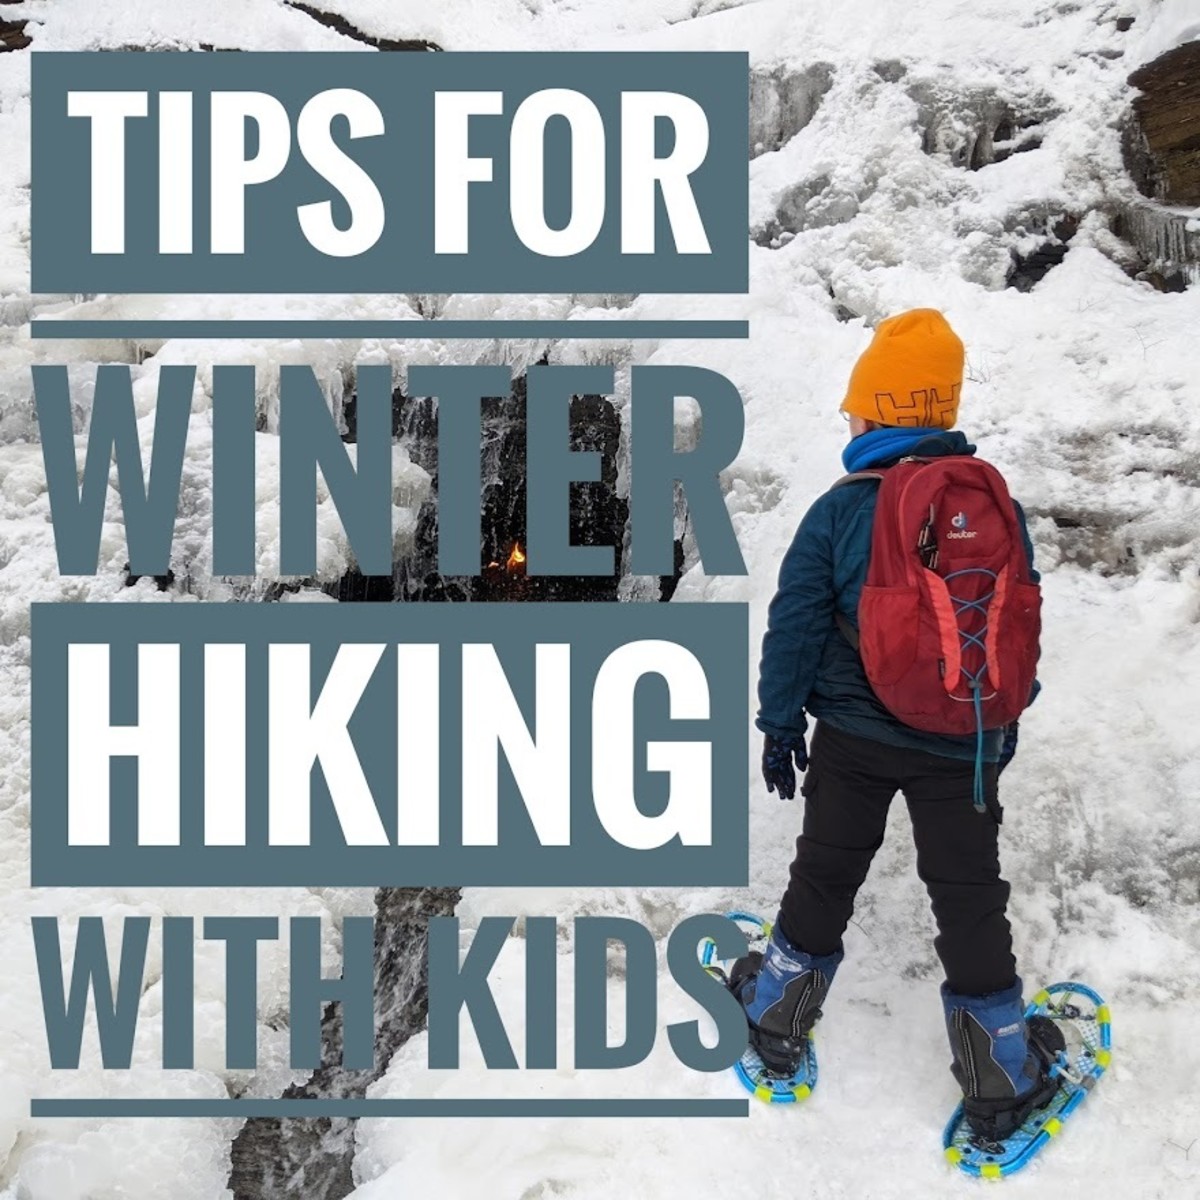 Winter Hiking With Babies and Toddlers: Safety, Tips, & Gear - Dom Carson